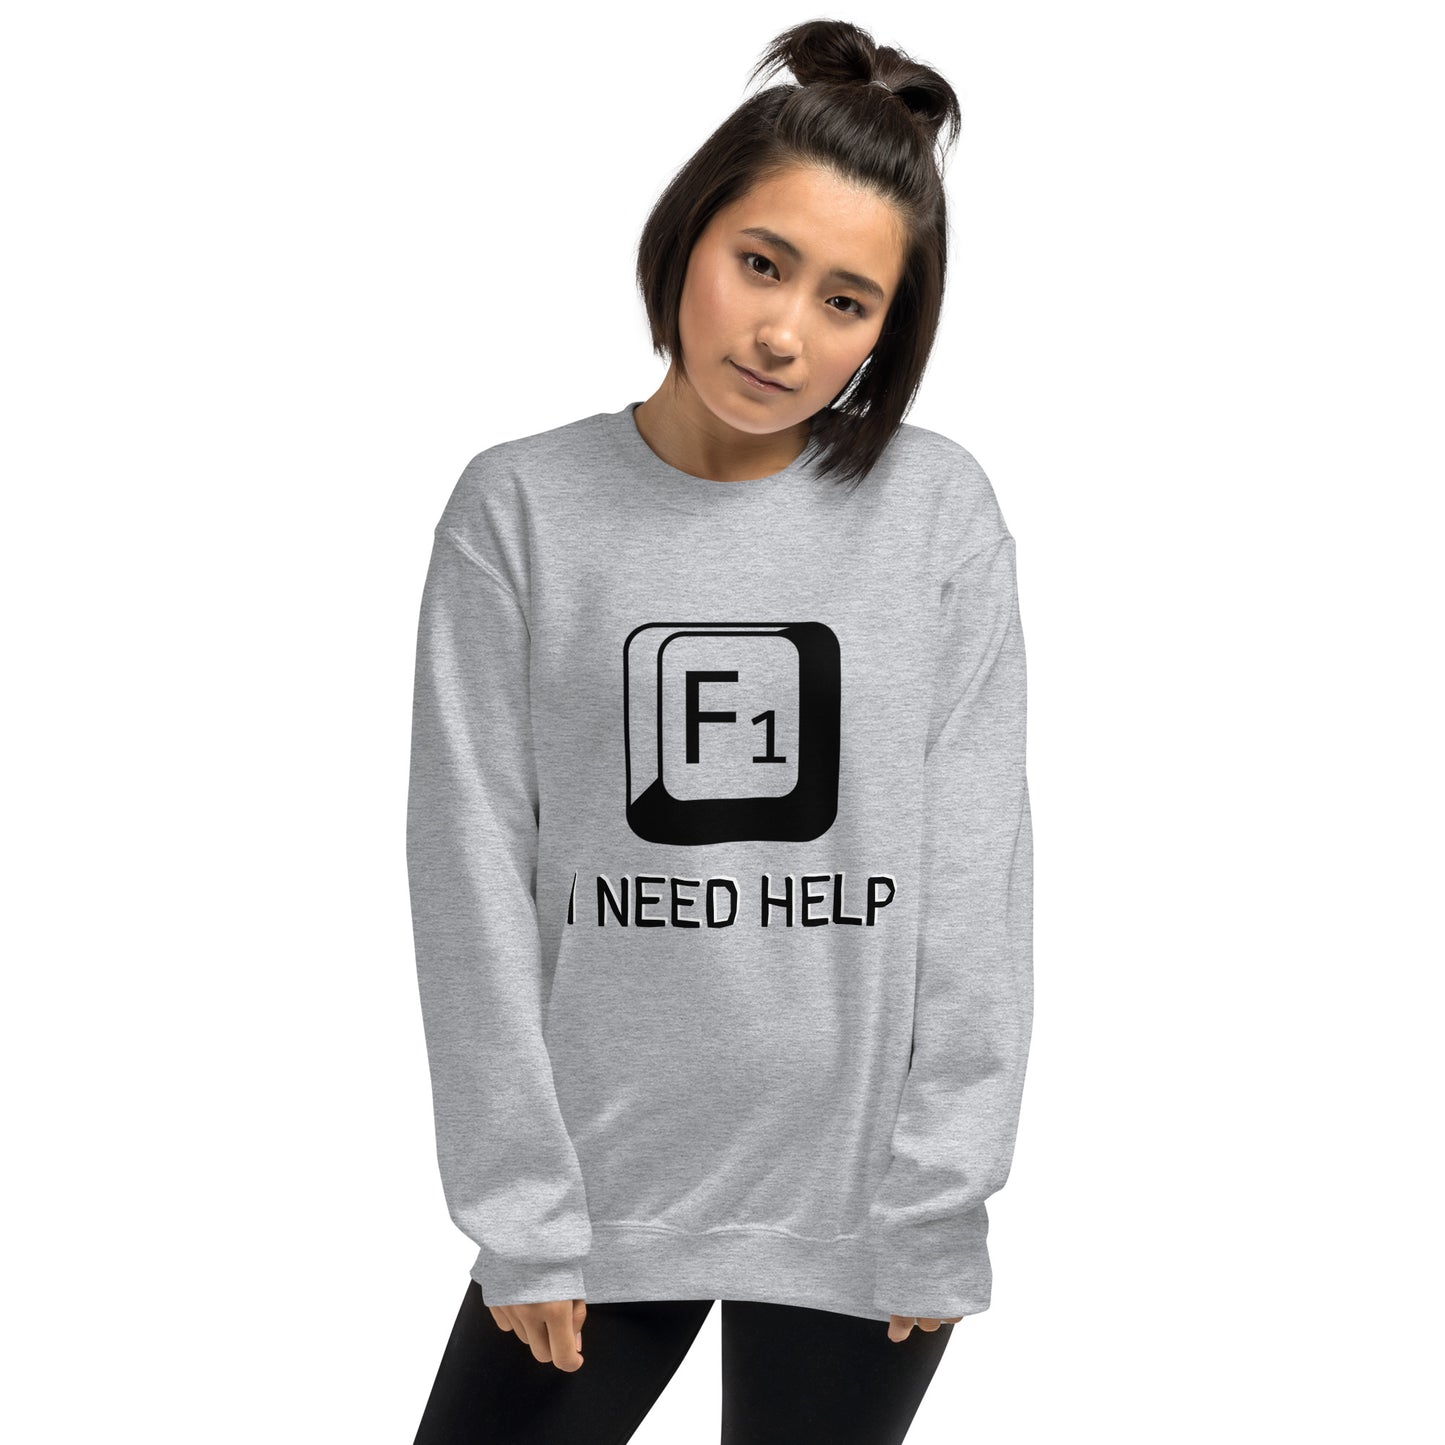 Women with sport grey sweatshirt and a picture of F1 key with text "I need help"